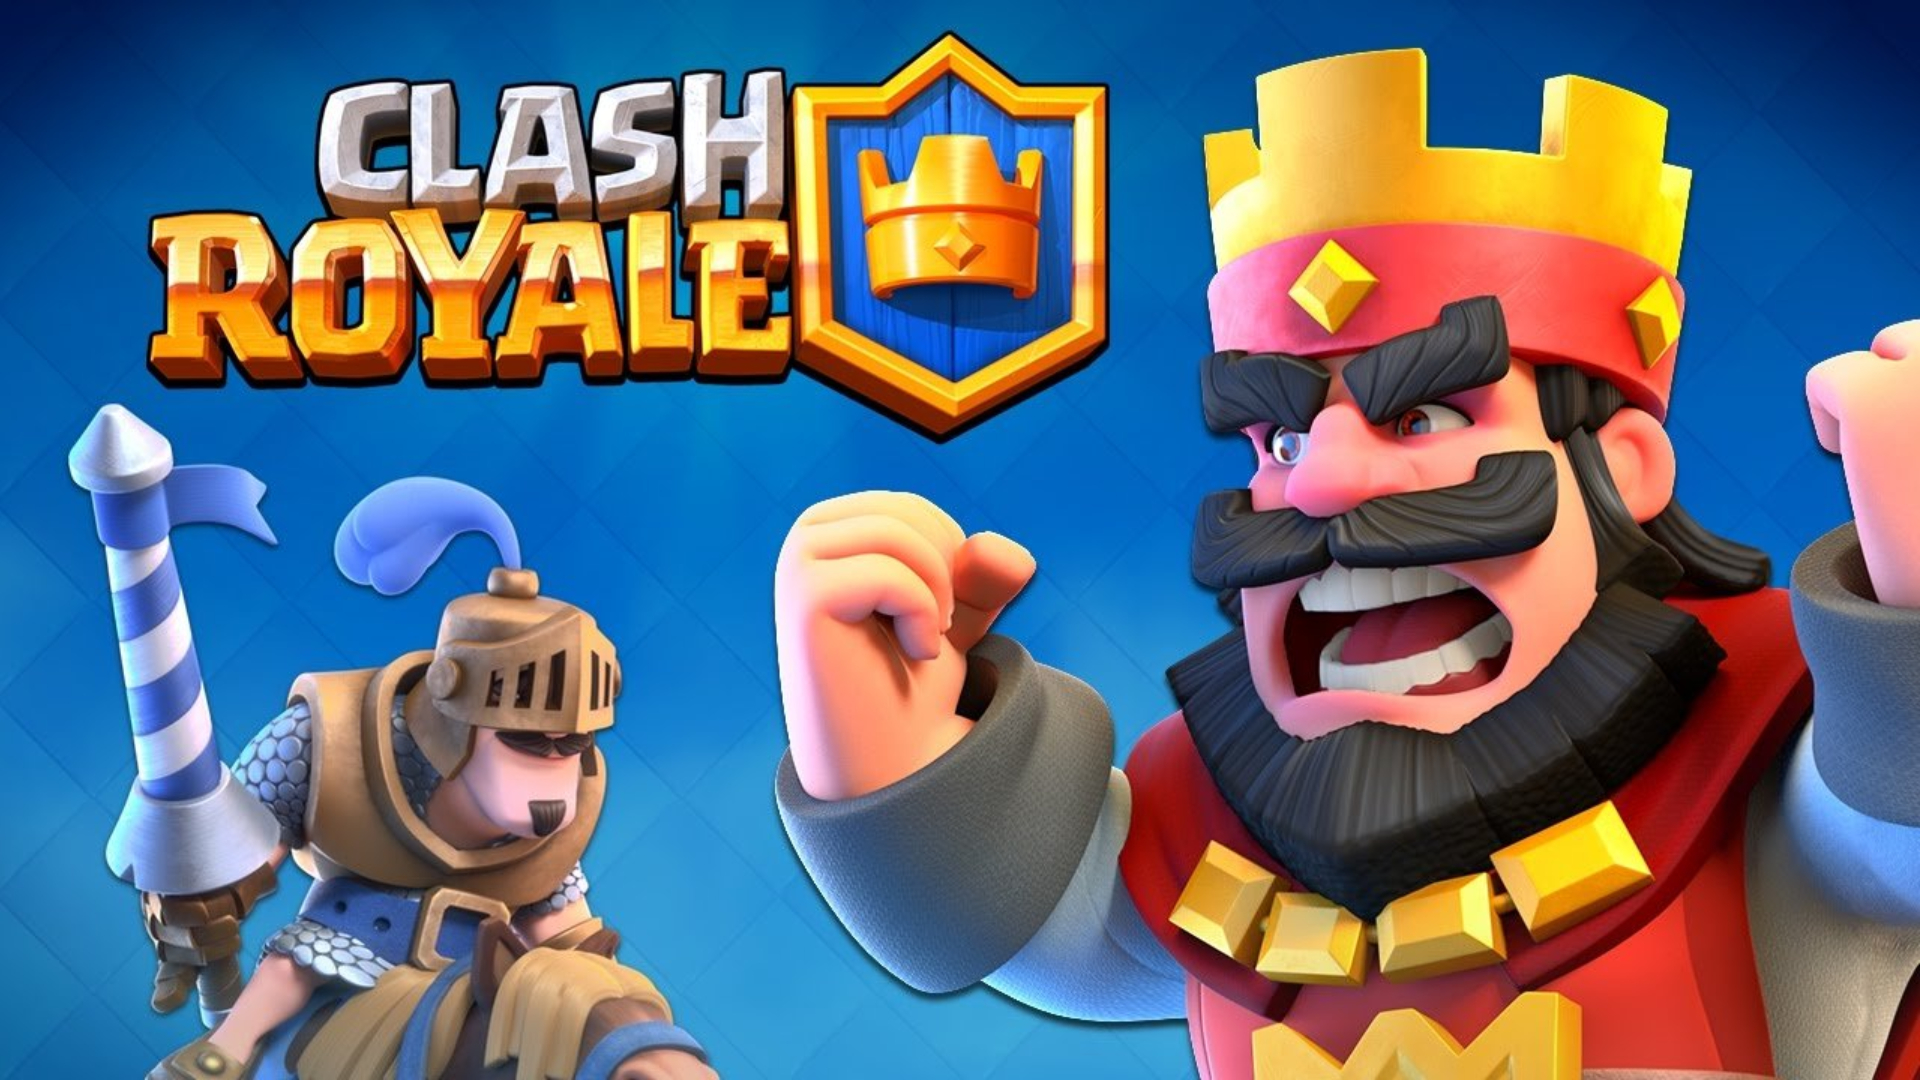 Top 6 Best Games Like Clash Royale on Mobile image